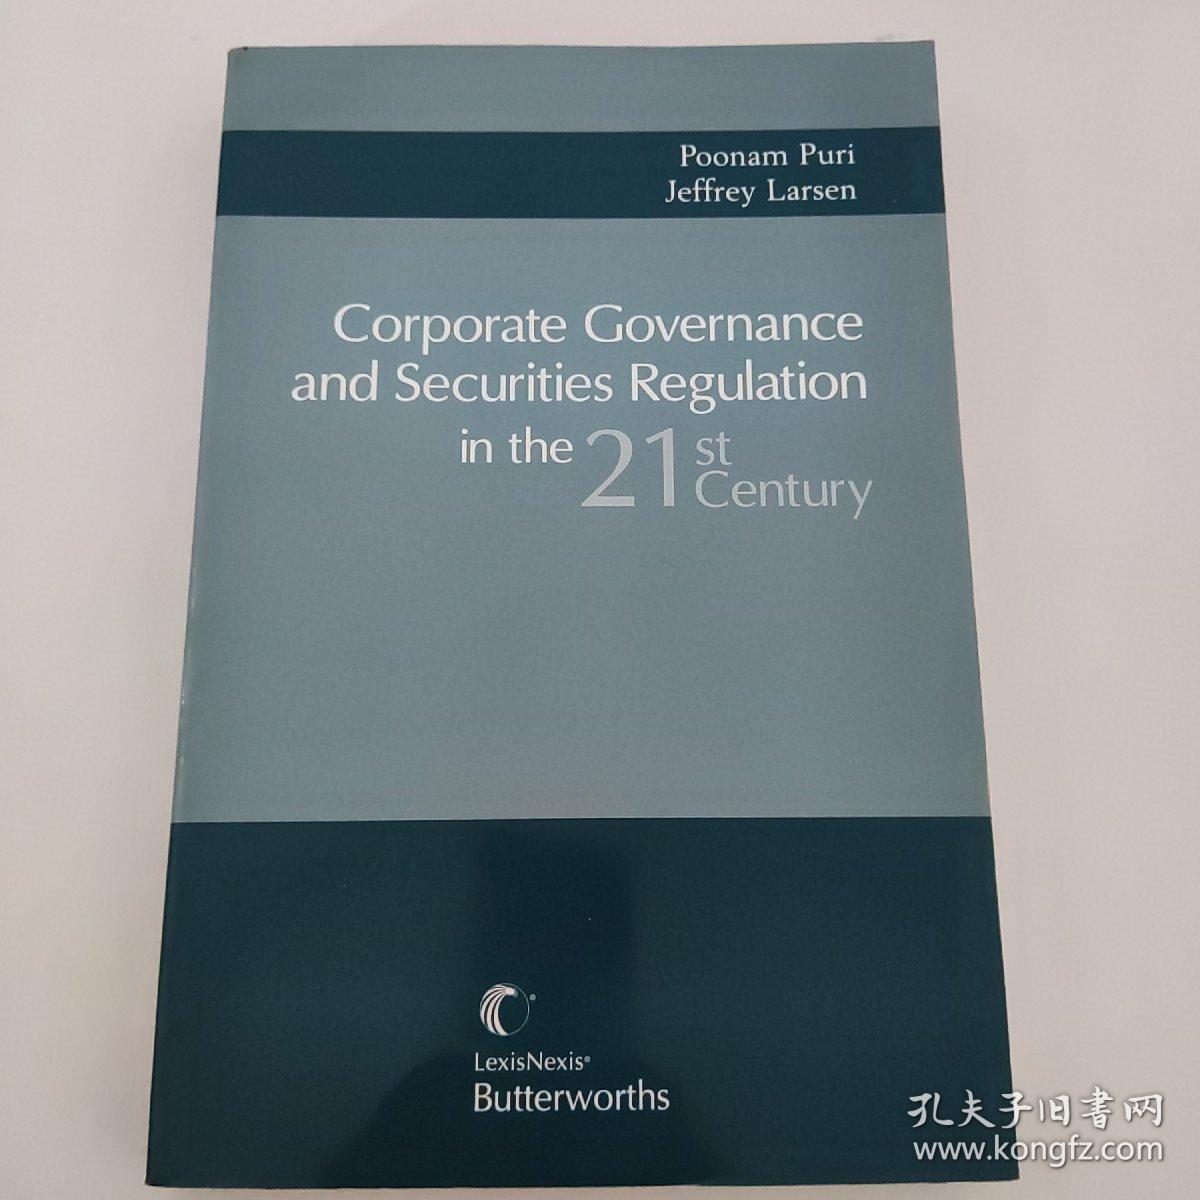 Corporate Governance and Securities Regulation  in the 21st century